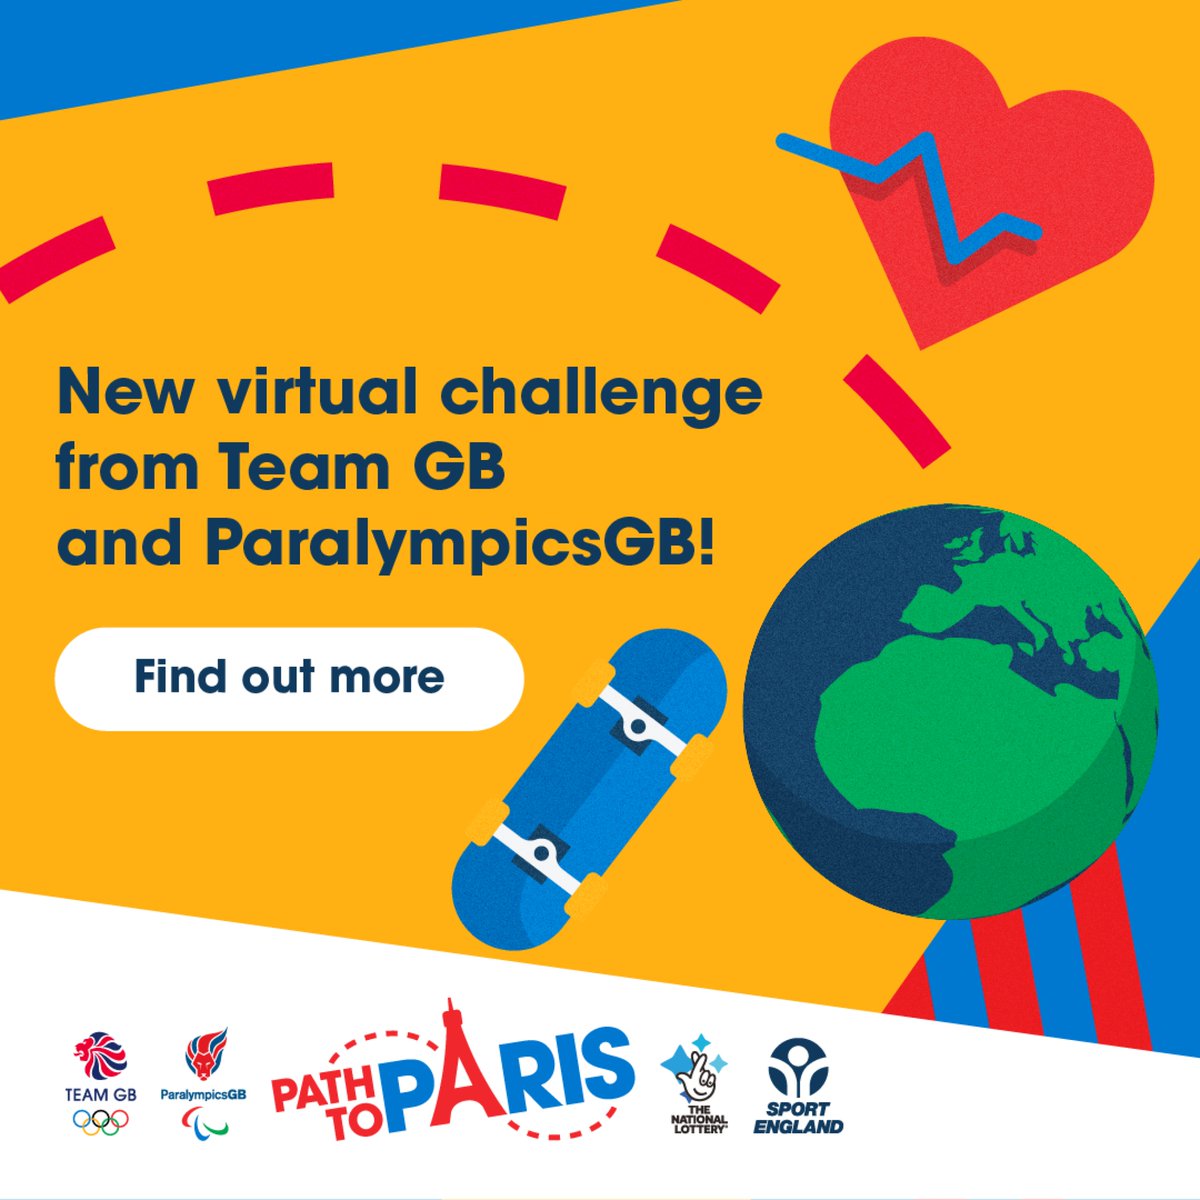 Get involved on The Path to Paris virtual journey! Find out more and view the Taekwondo Talents Challenges featuring GB Taekwondo athletes Amy Truesdale and Bradly Sinden in the videos on our website at britishtaekwondo.org.uk/is-your-taekwo… #PathToParis